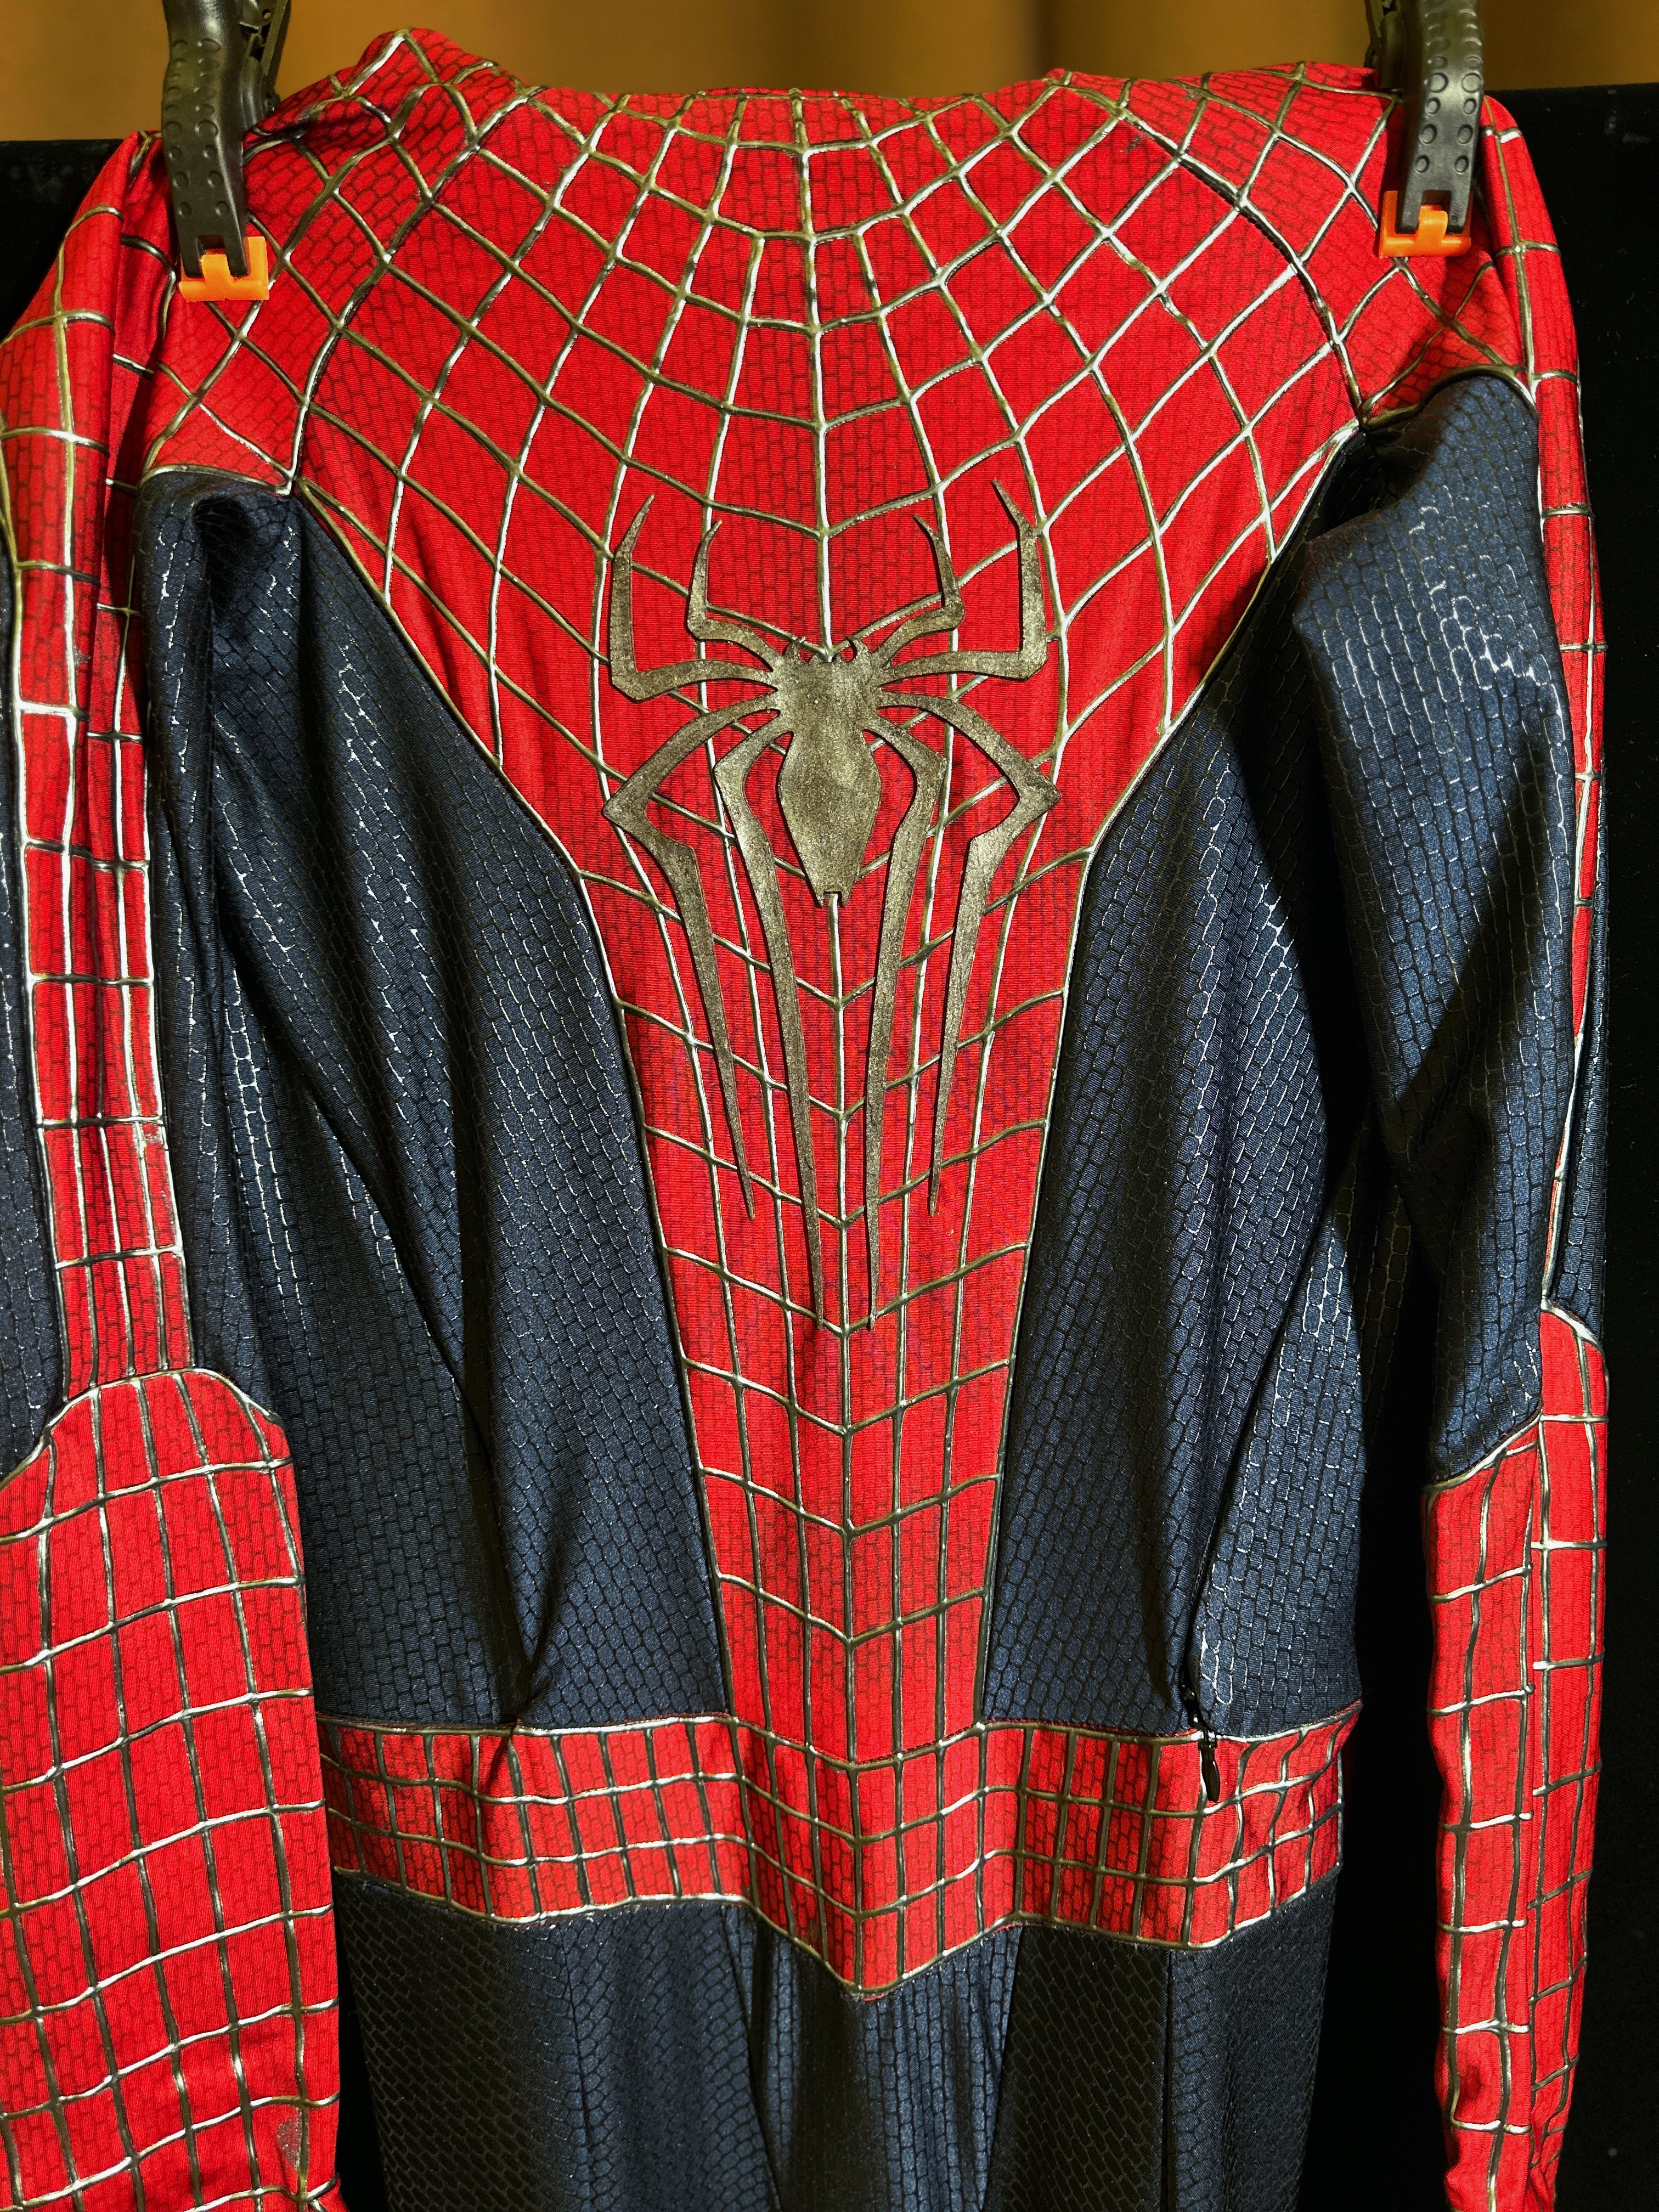 TASM 2 Suit (Andrew) with Face shell & 3D Rubber Web Movie Prop Replica(wearable)